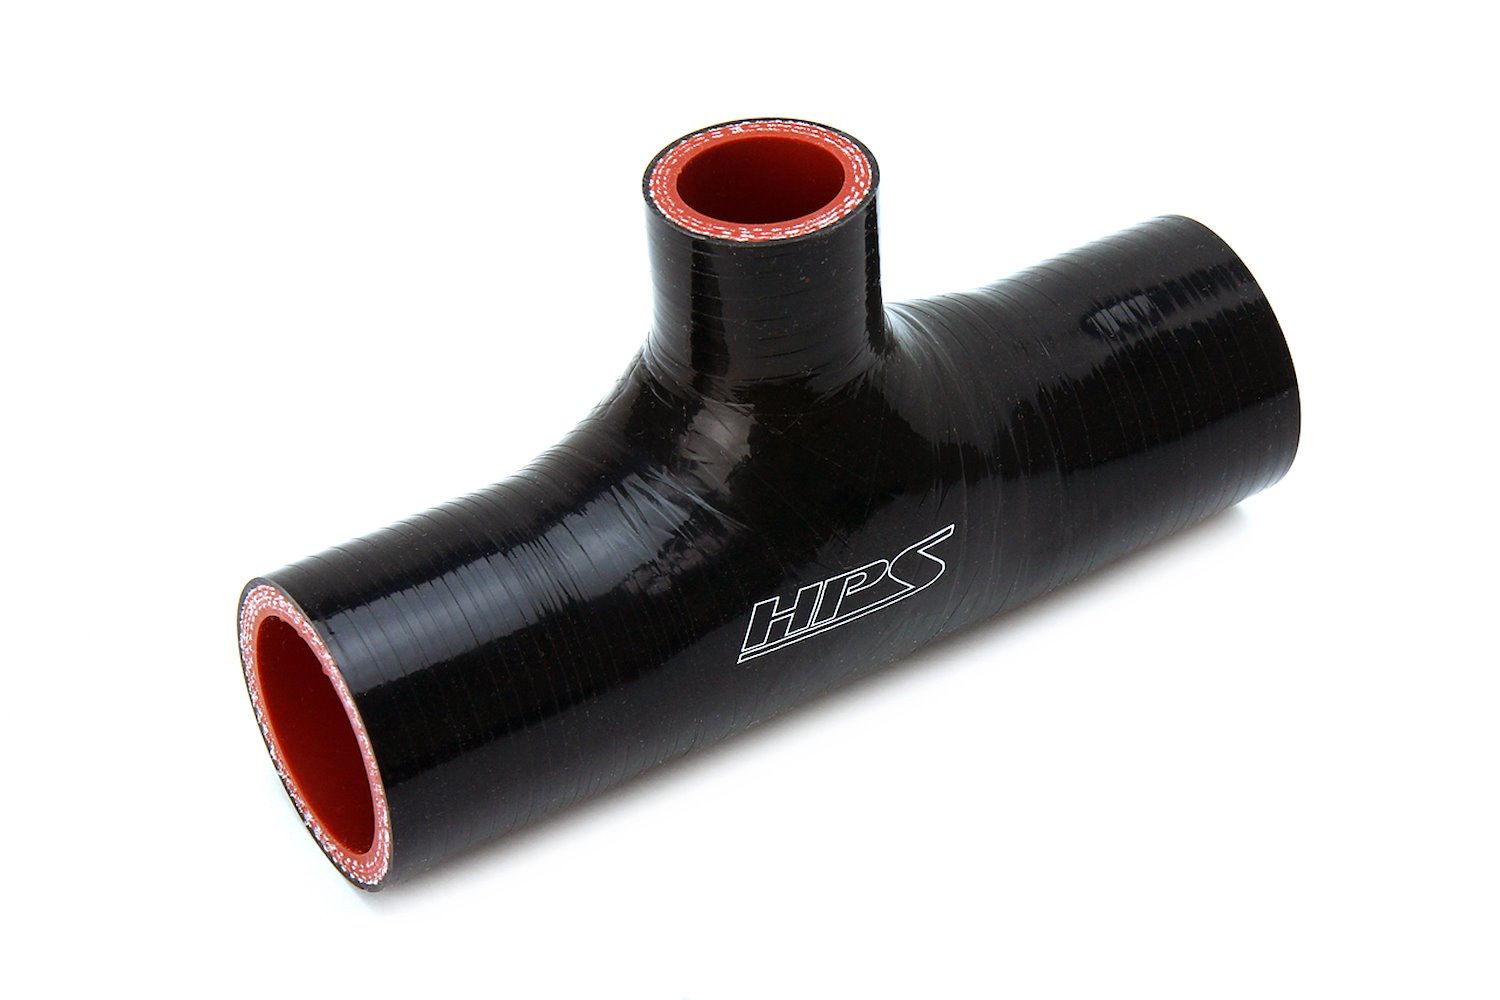 150-THOSE-100-BLK Silicone Tee Hose Adapter, High-Temp 4-Ply Reinforced, 1-1/2 in. ID, Black